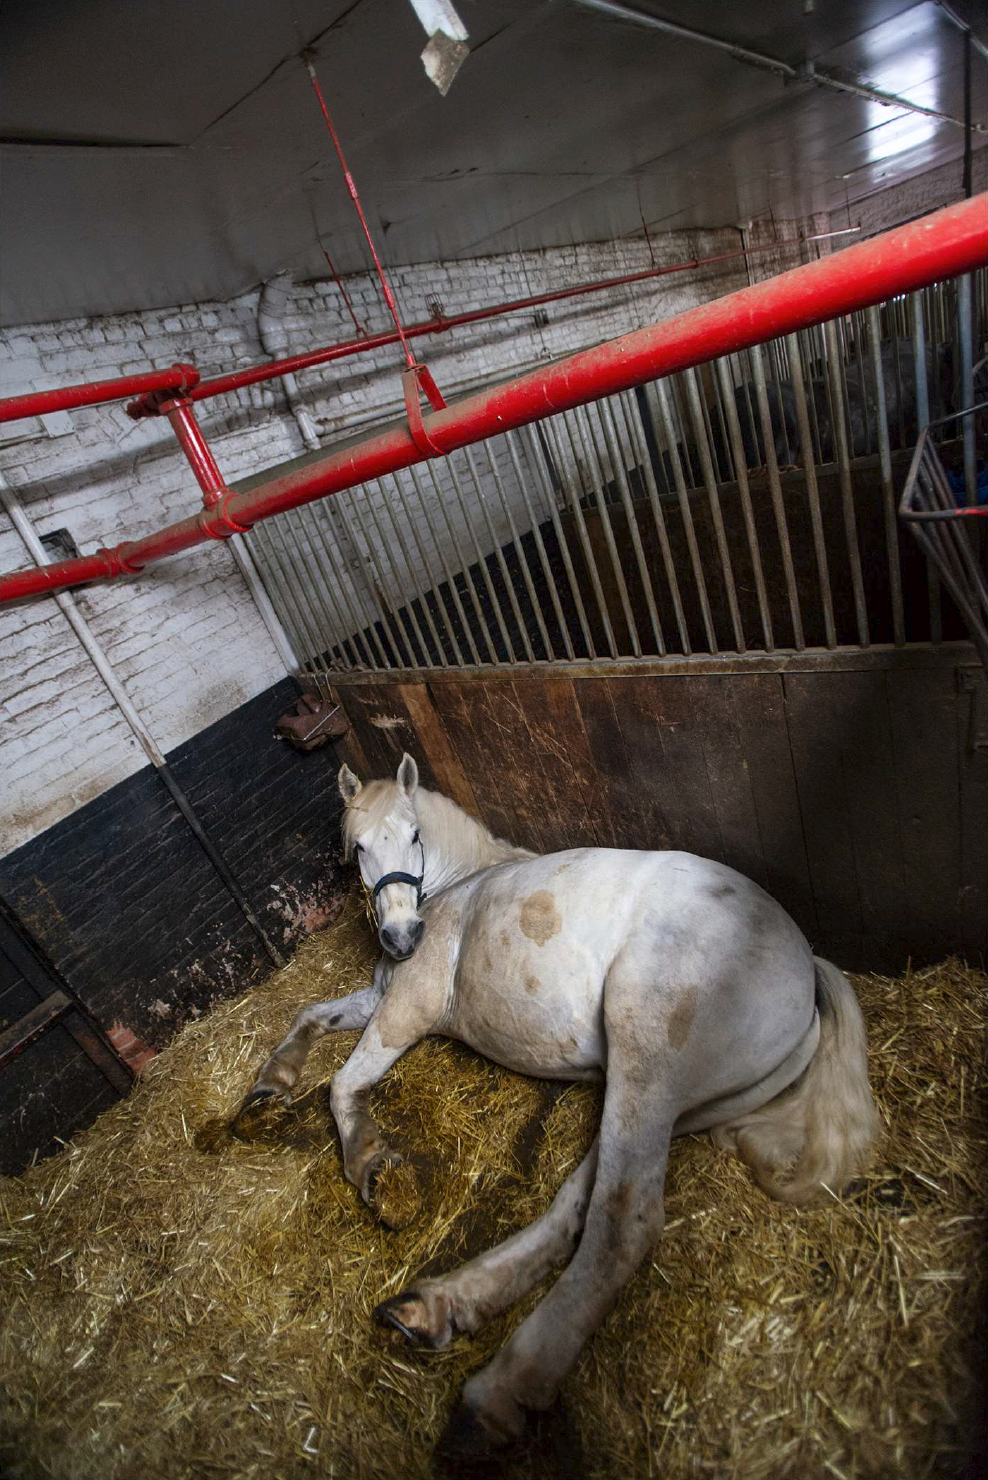  A horse in his stall, Clinton Park Stable, New York, May 2019. 